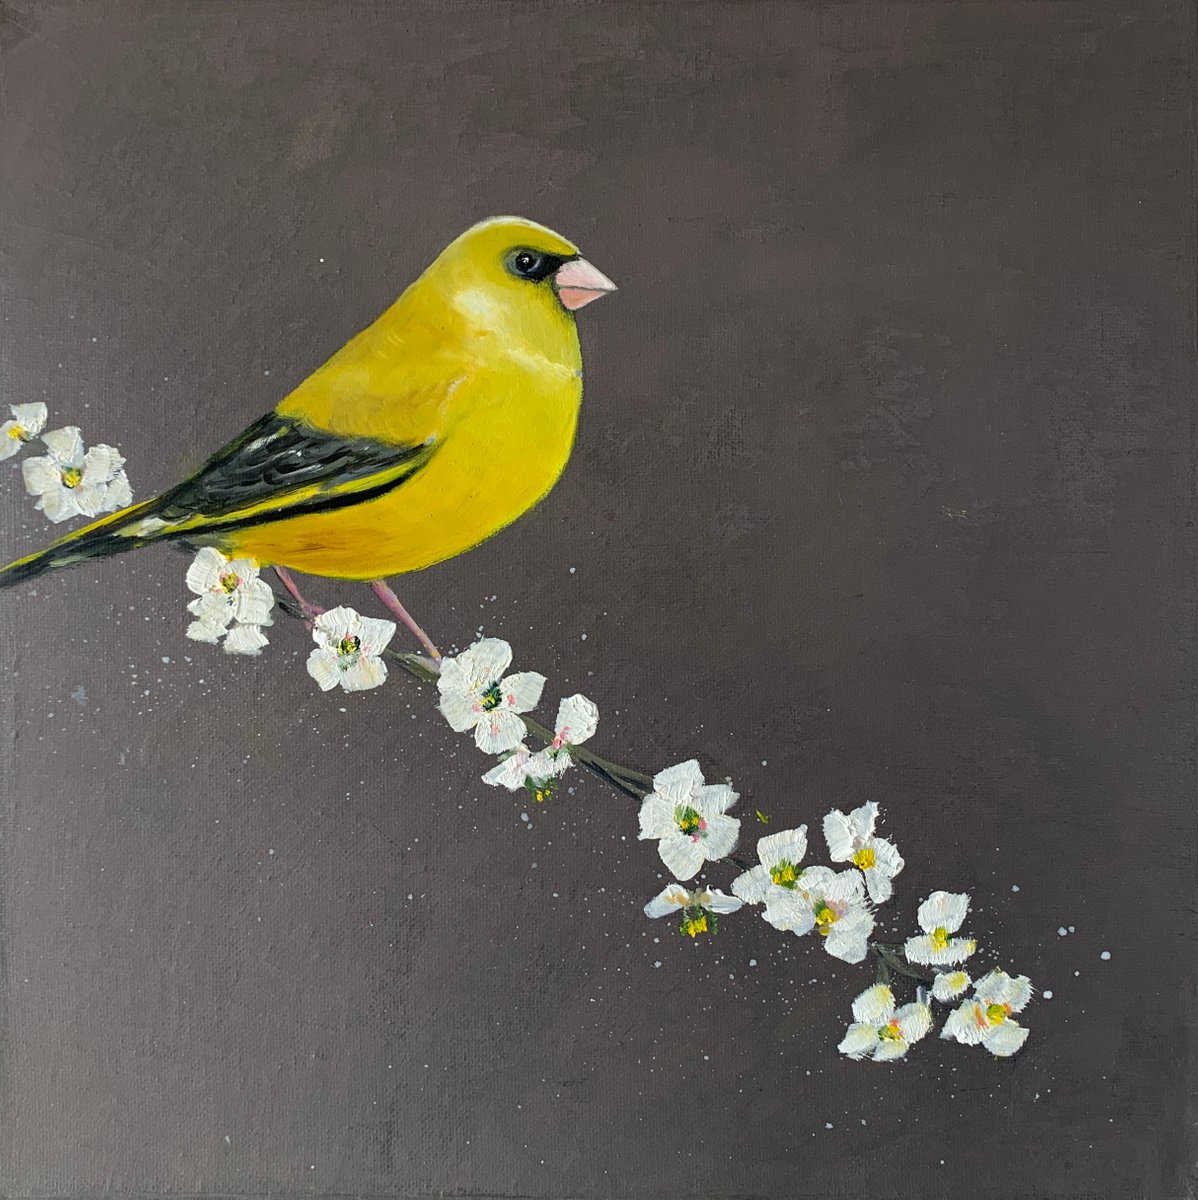 Greenfinch on Cherry Blossom by Laure Bury